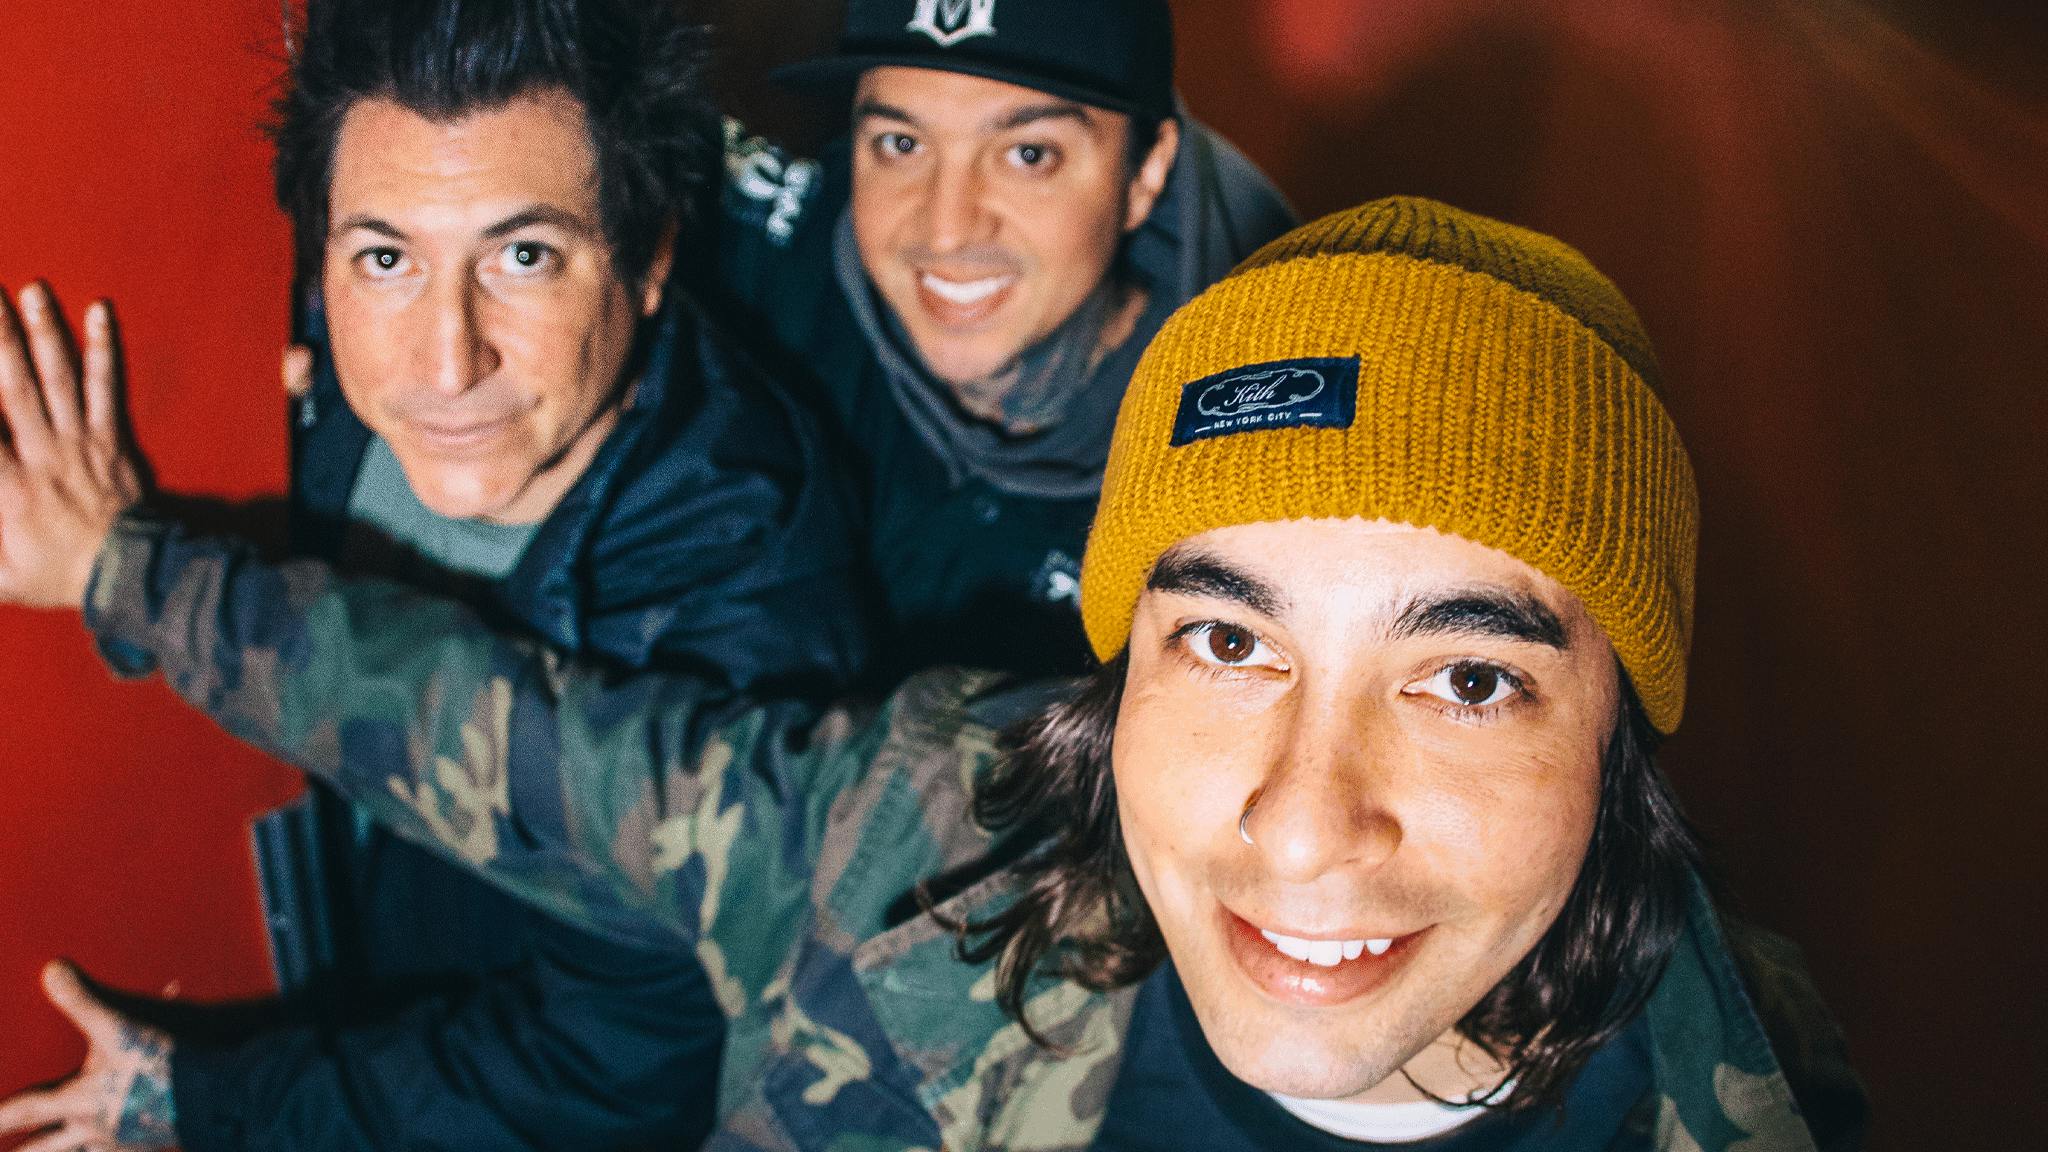 Pierce The Veil and The Used announce co-headline tour